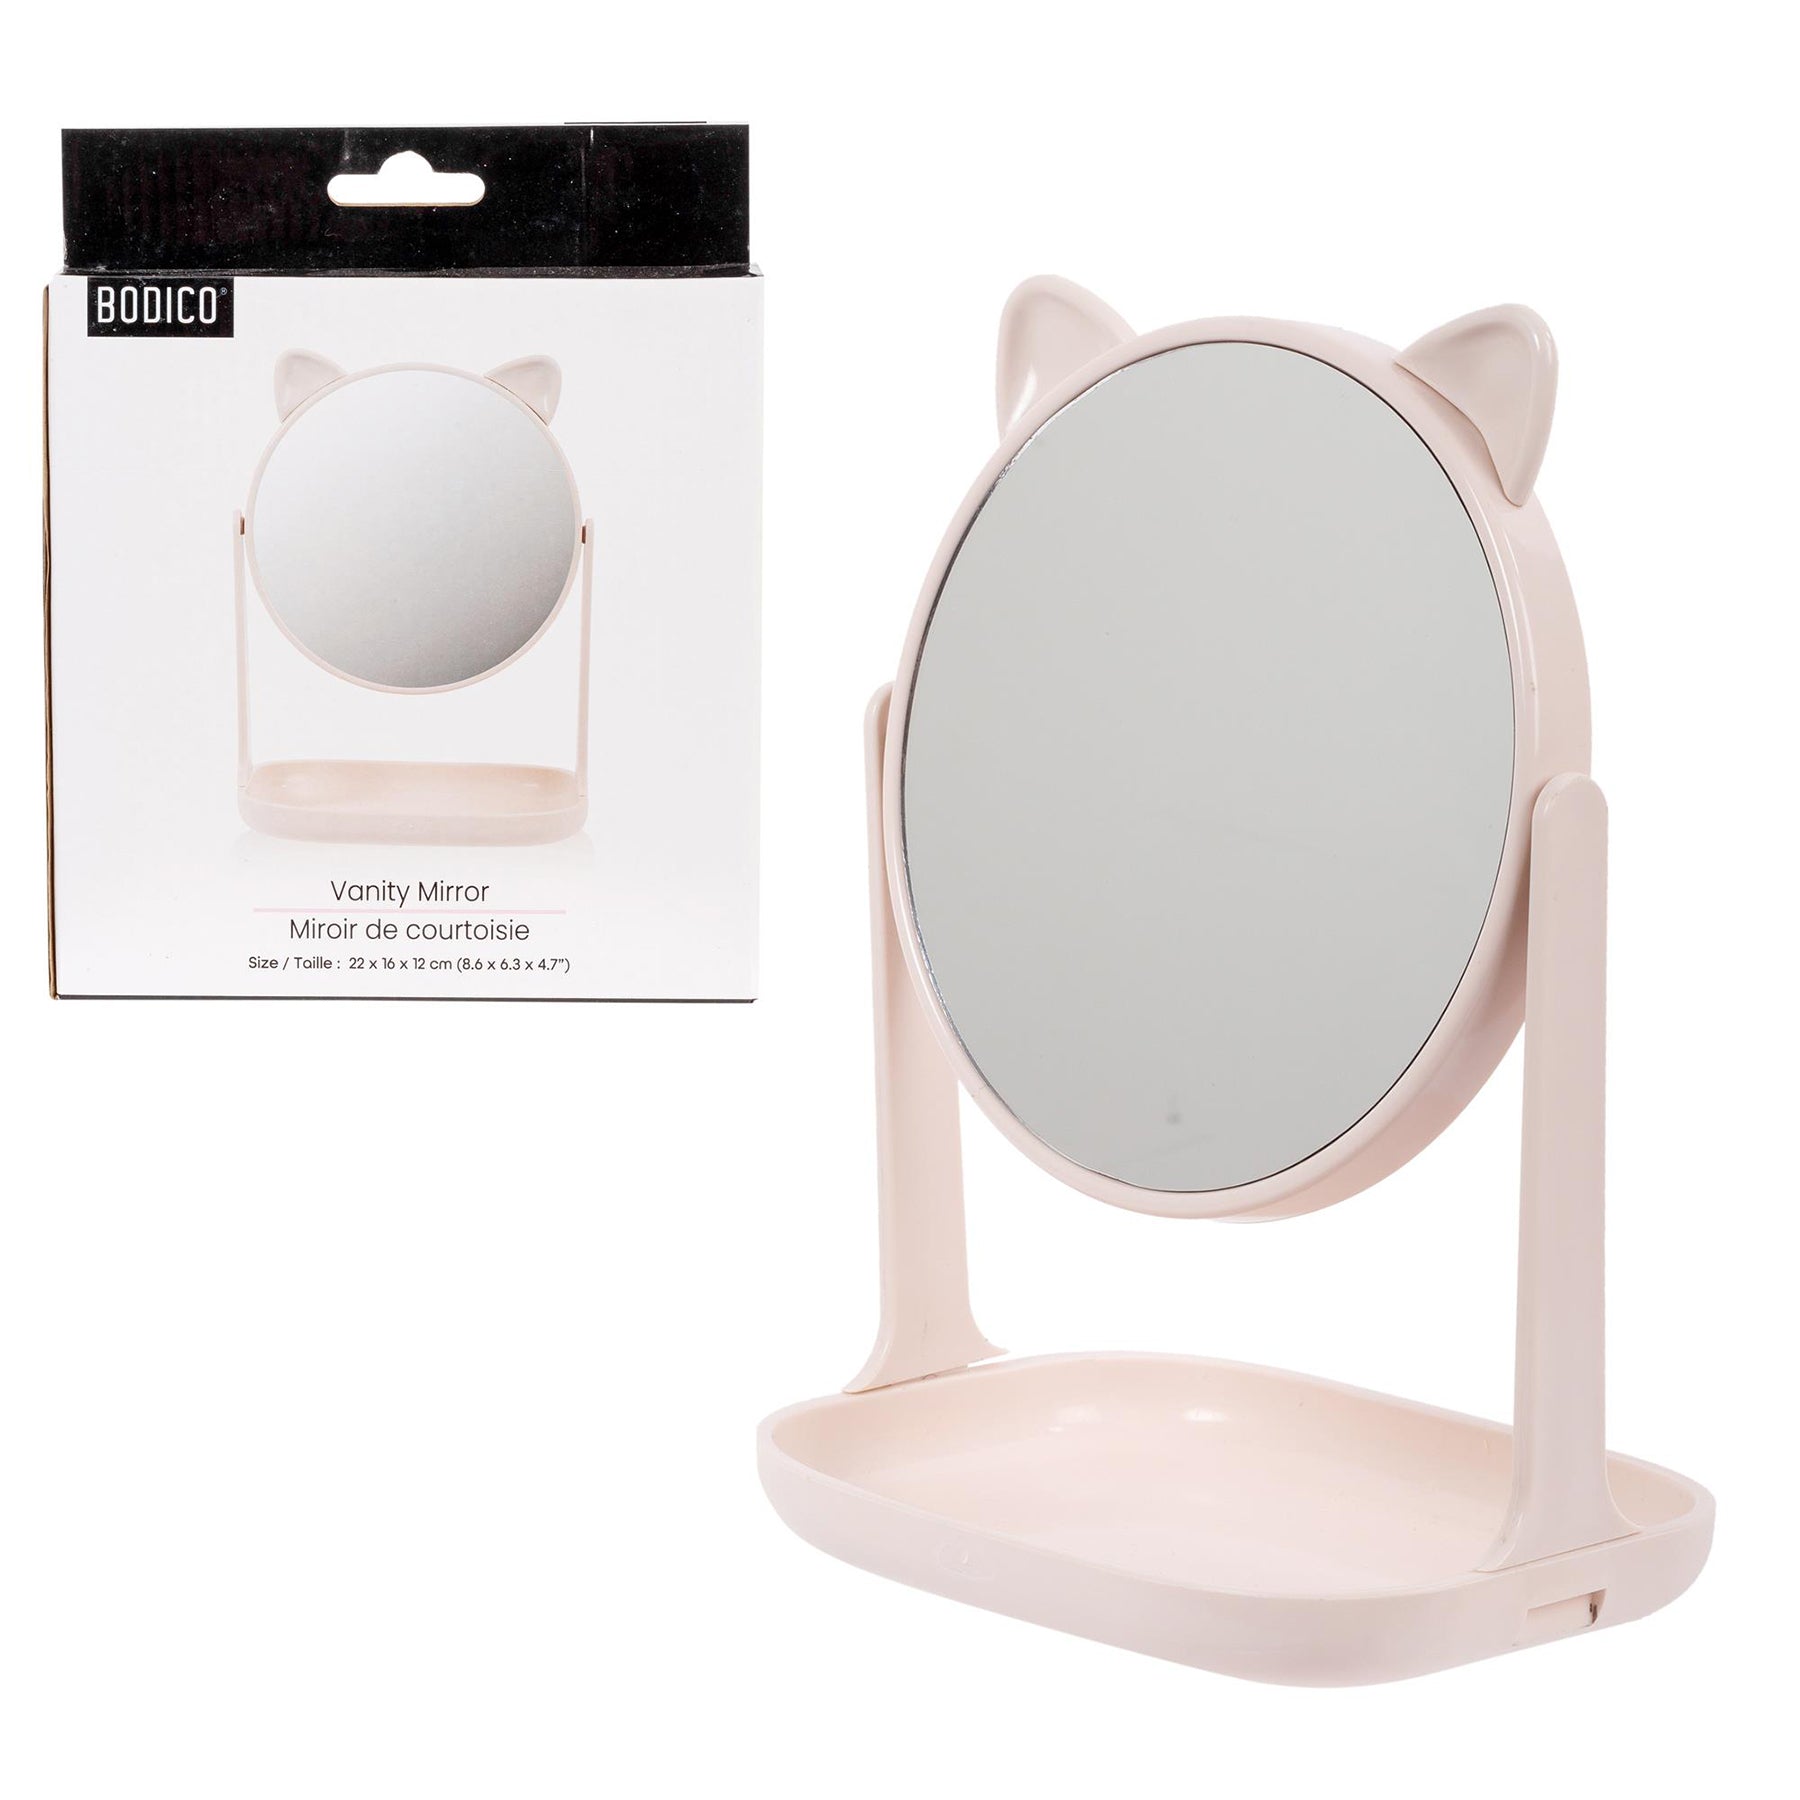 Bodico Vanity Mirror Kitty with Tray Pink 8.6x6.3x4.7in